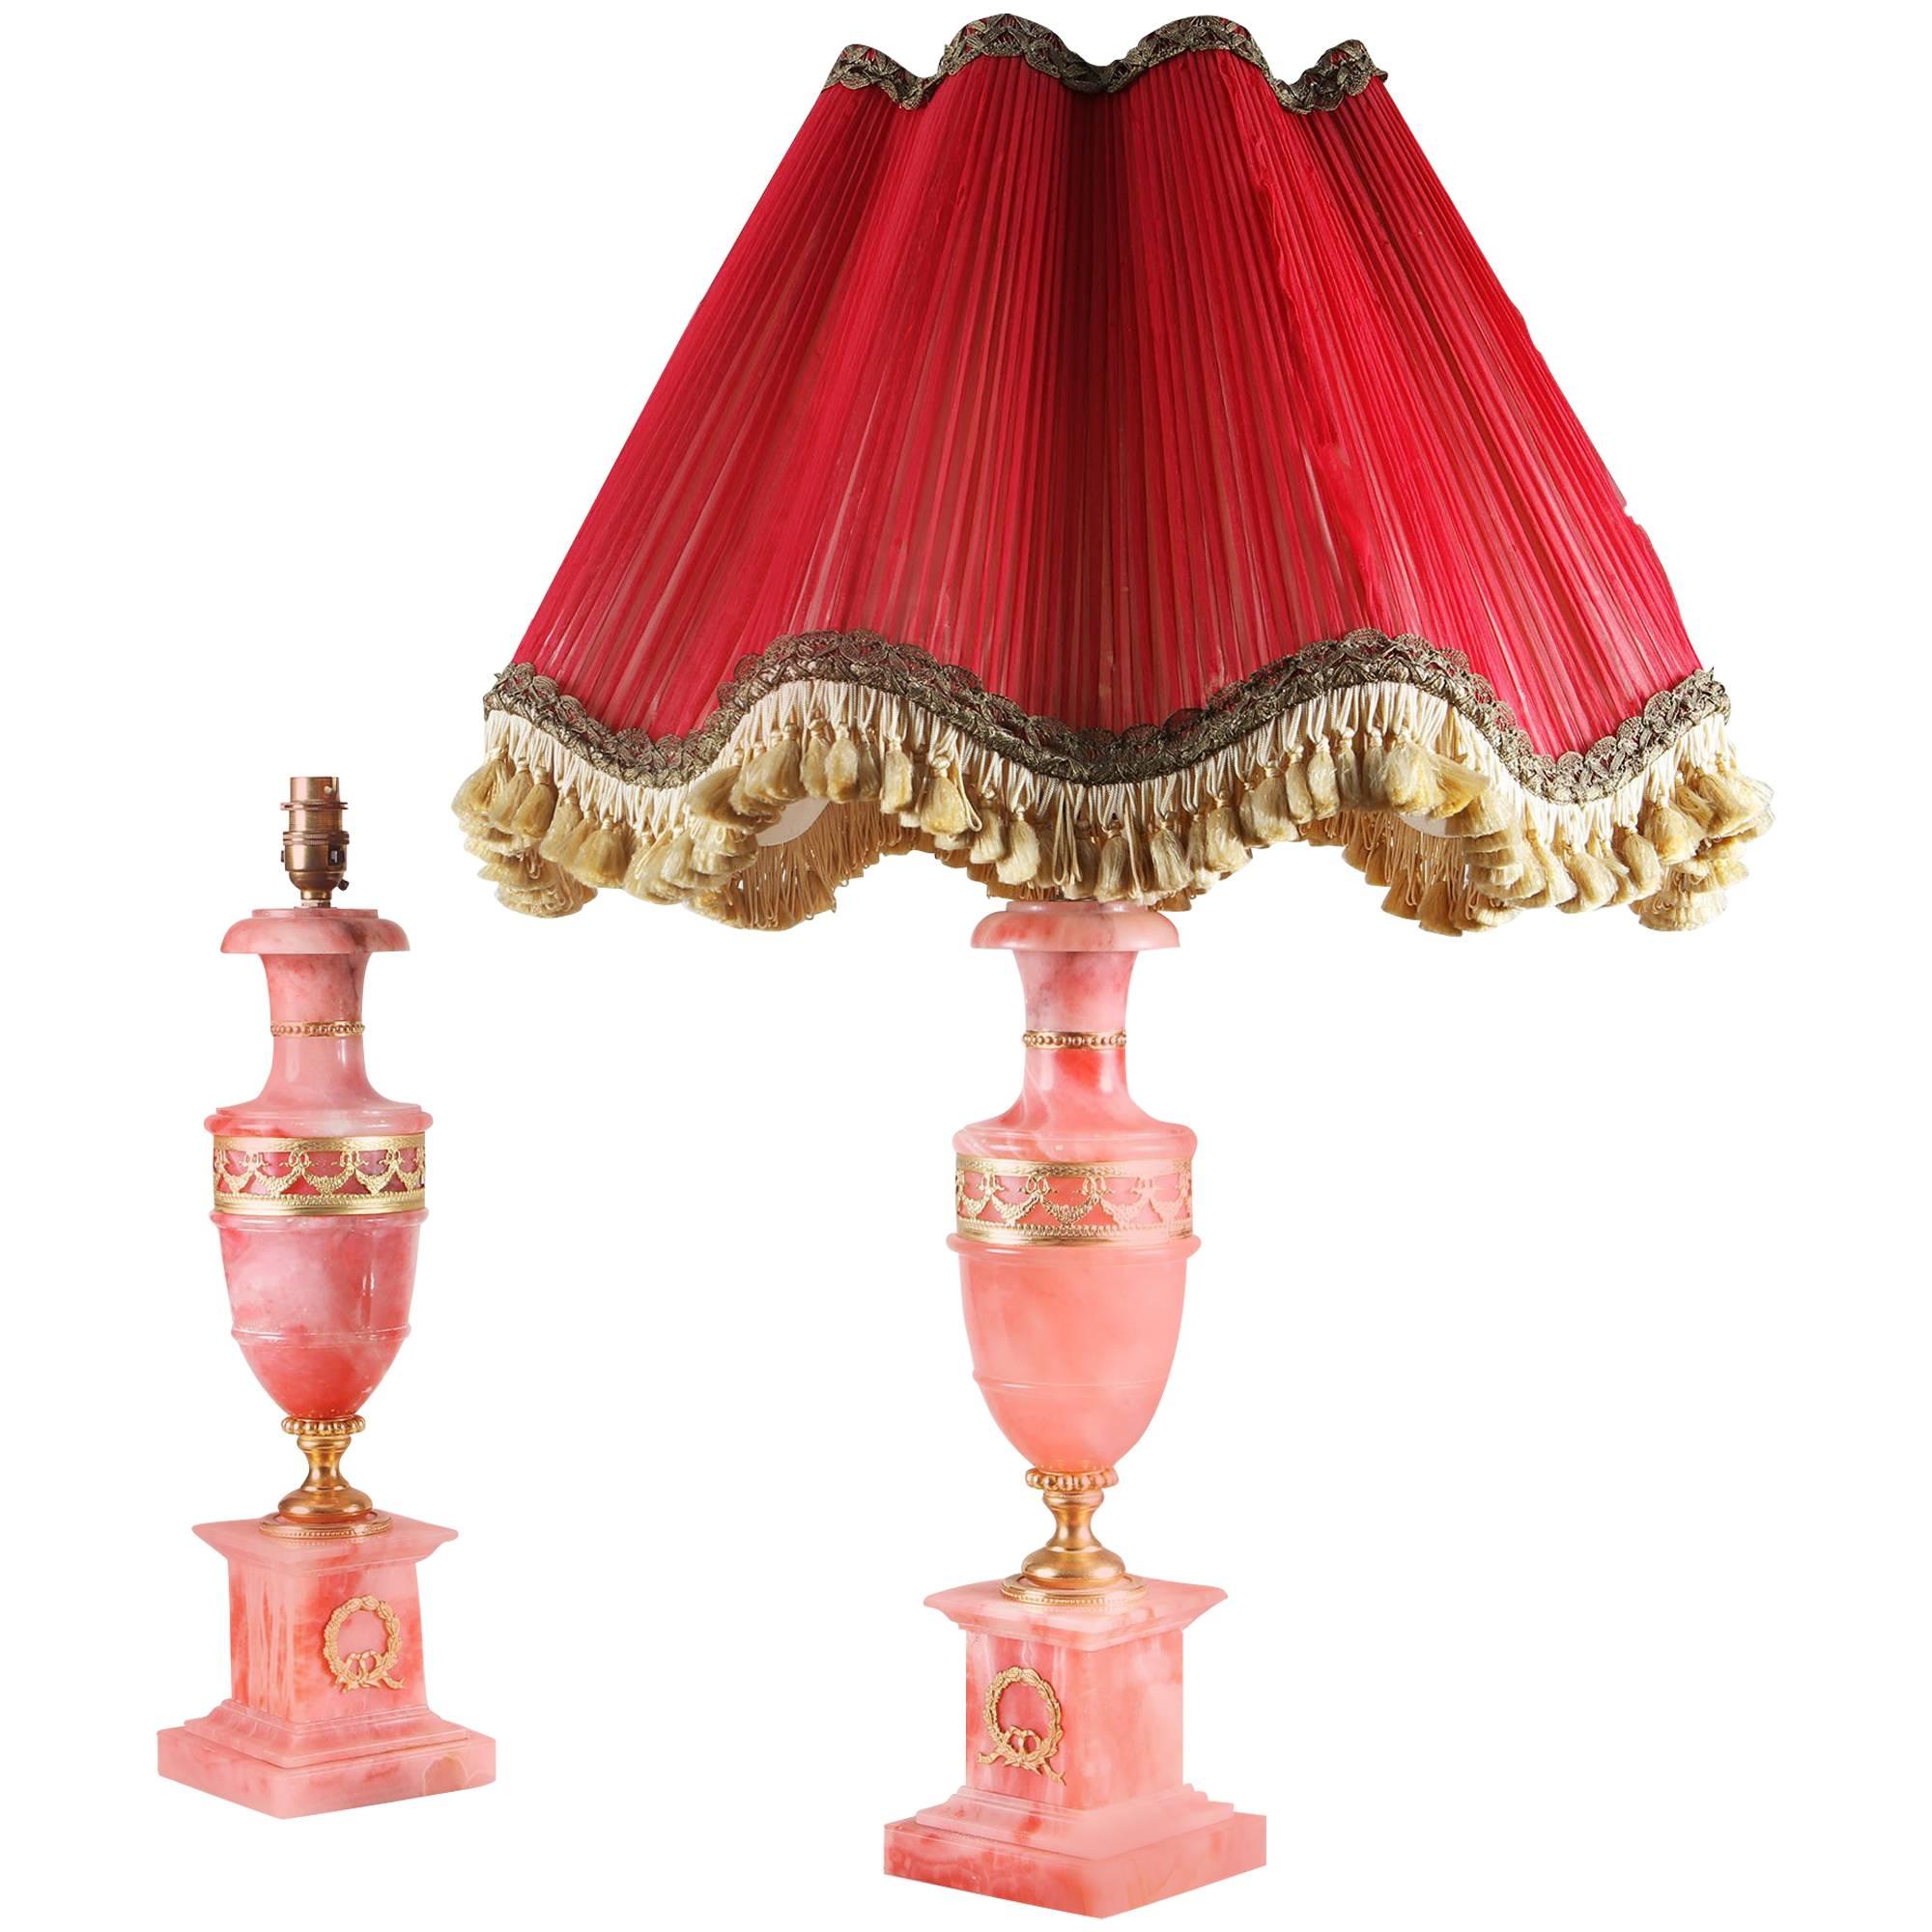 Pair of Ormolu-Mounted Pink Onyx Lamps with Red Tasseled Shades